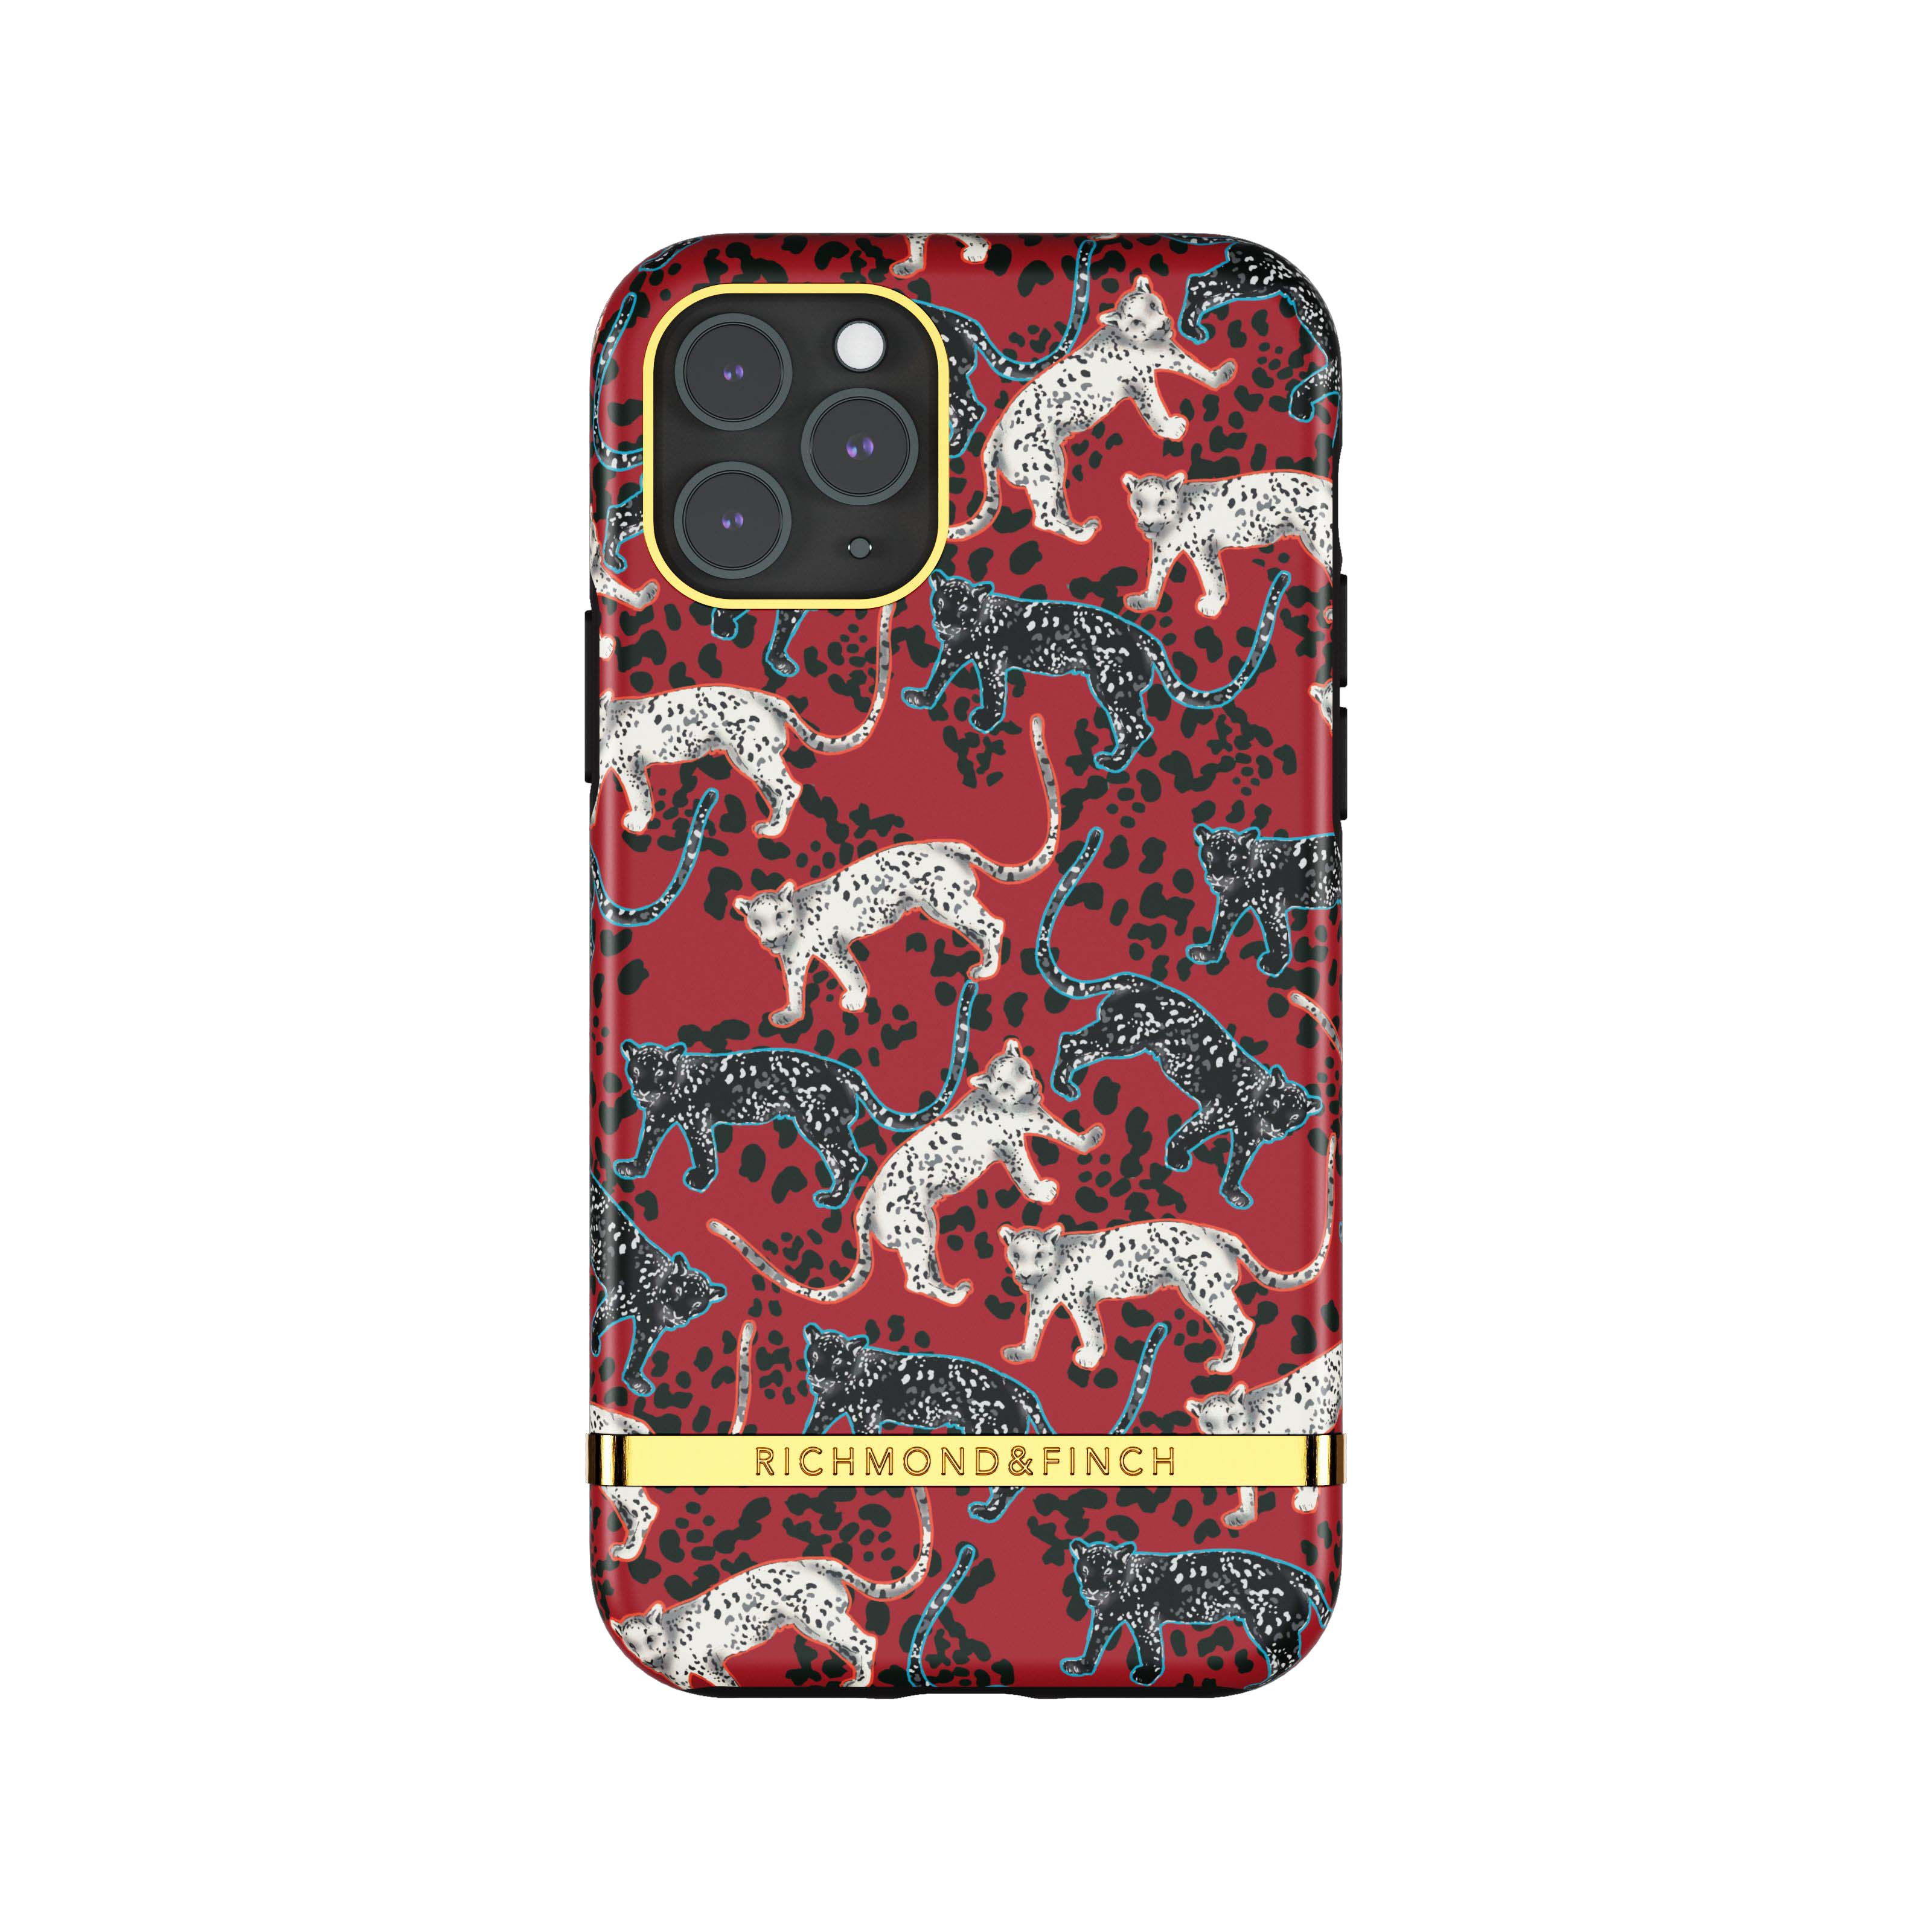 FINCH Samba PRO, IPHONE 11 RICHMOND APPLE, & Backcover, 11 Red iPhone Pro, Leopard RED